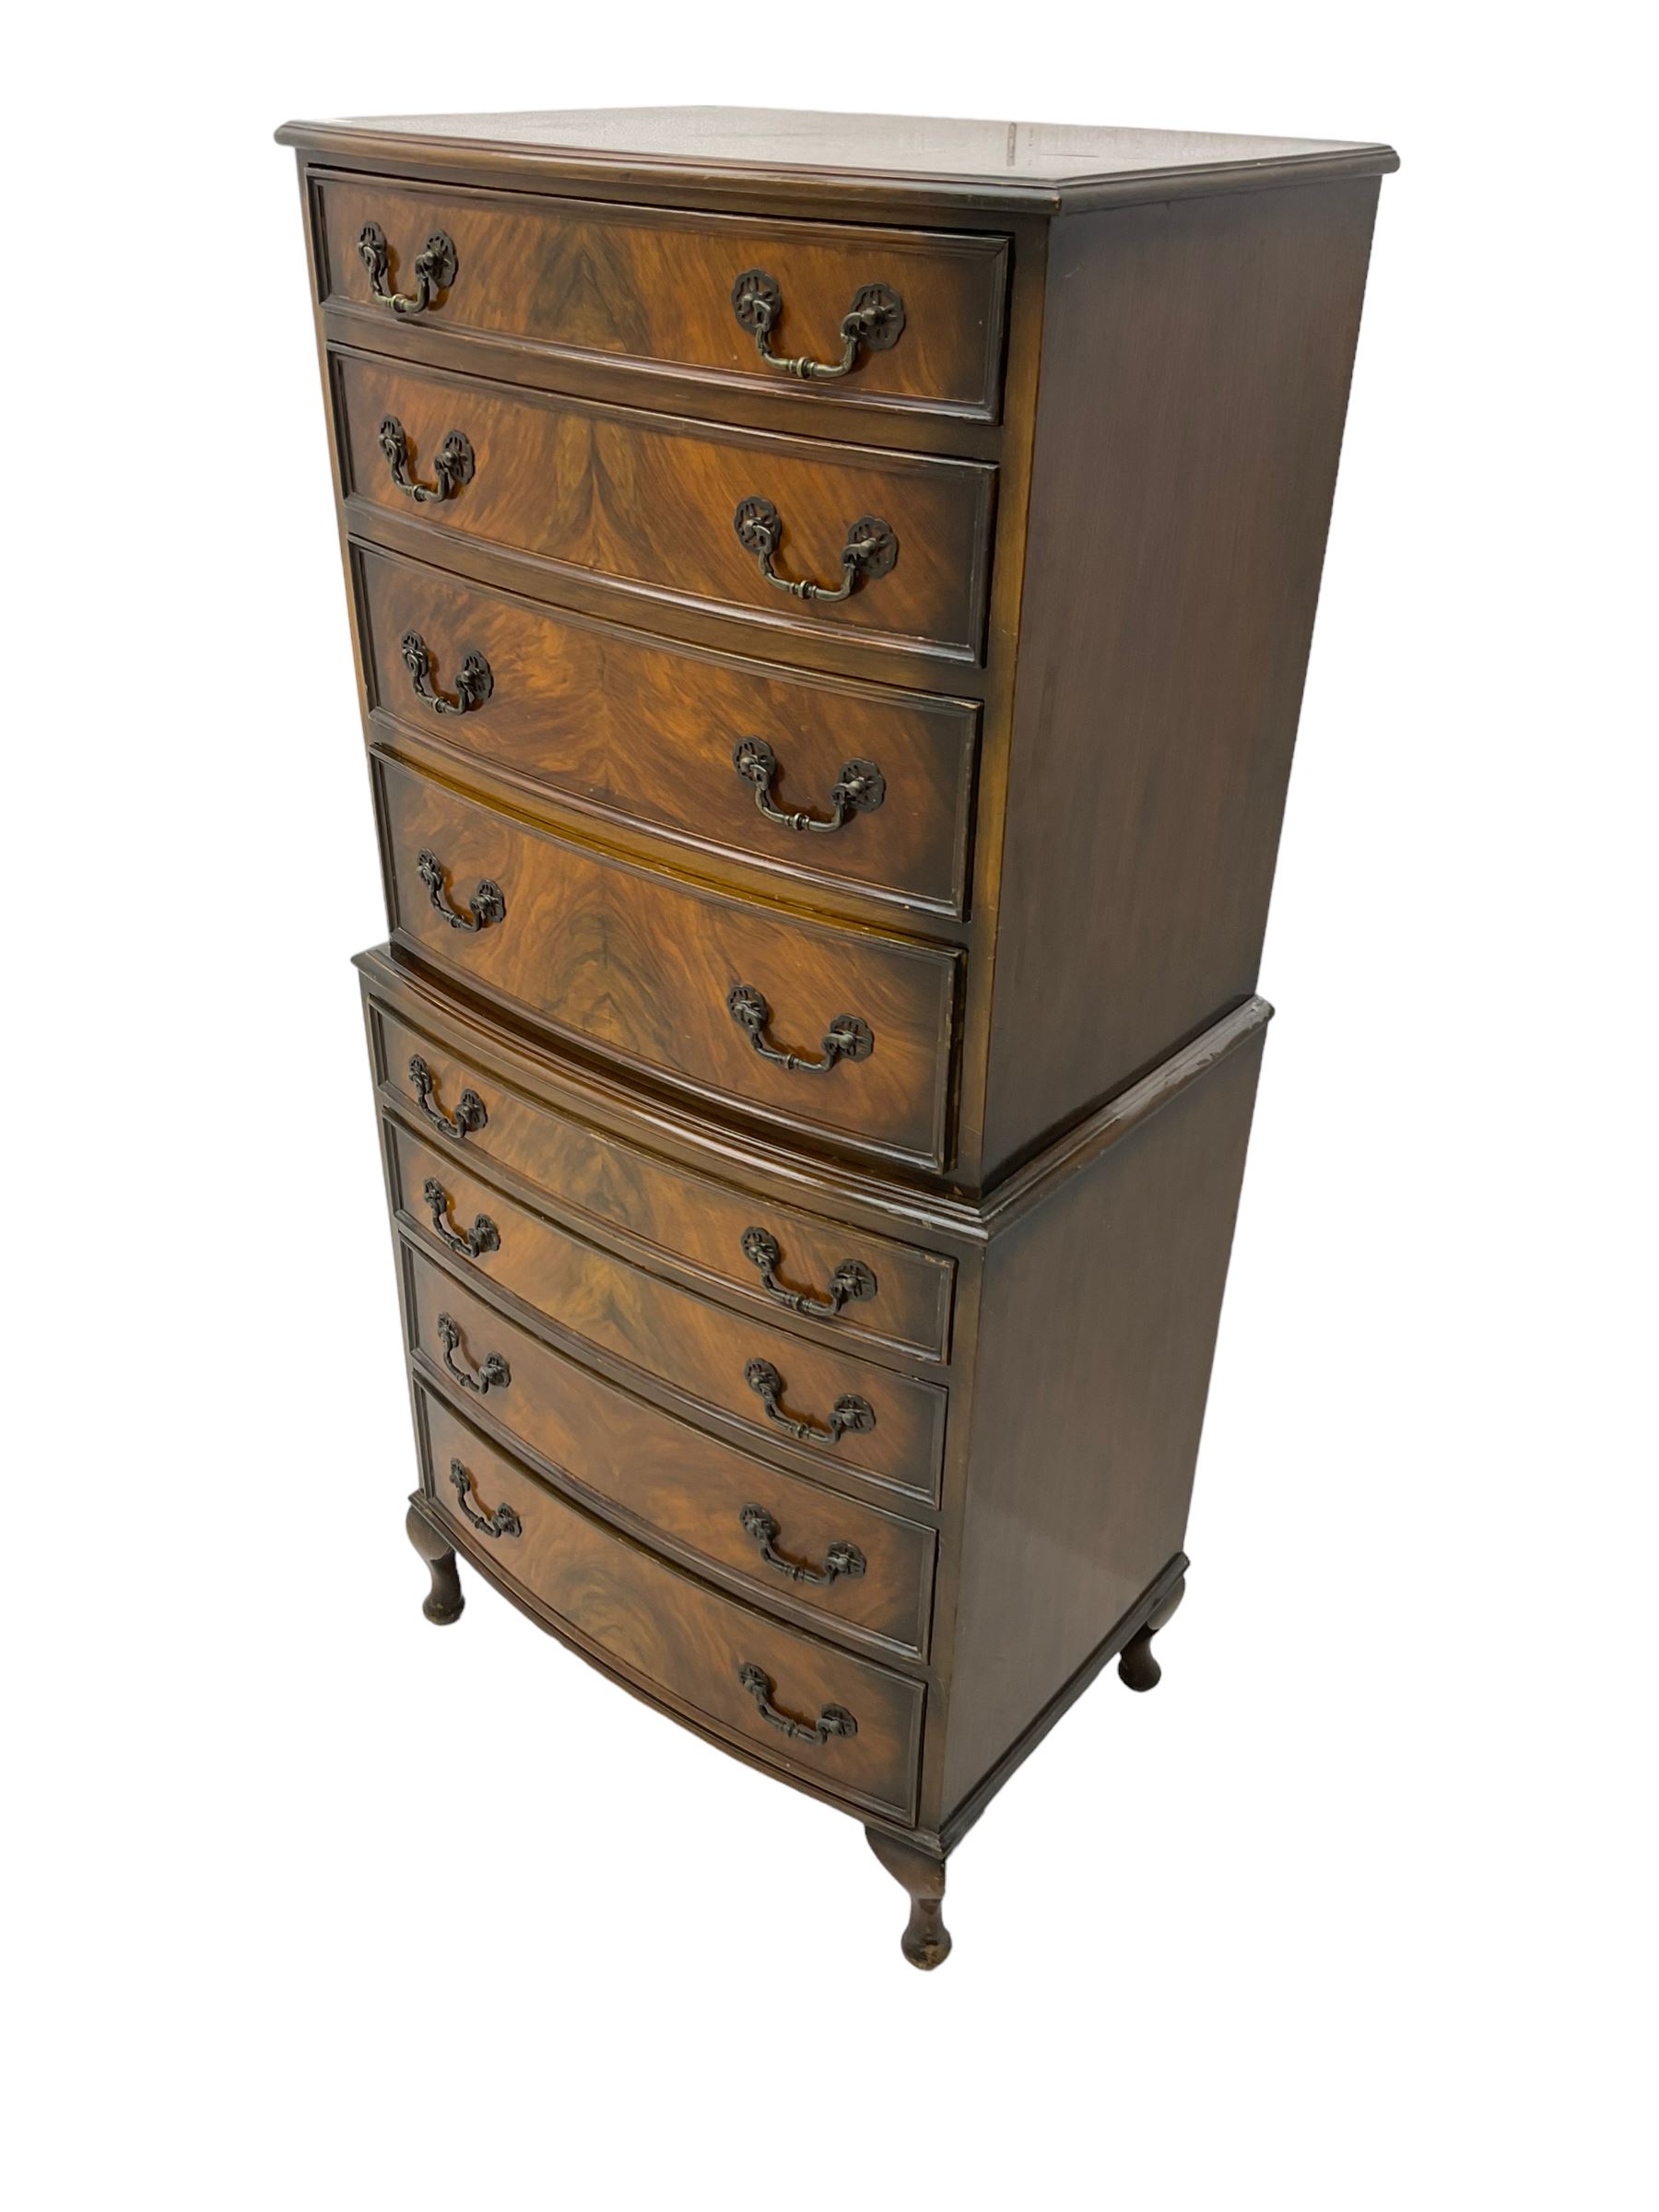 Mid-20th century walnut bow-front chest on chest - Image 2 of 7